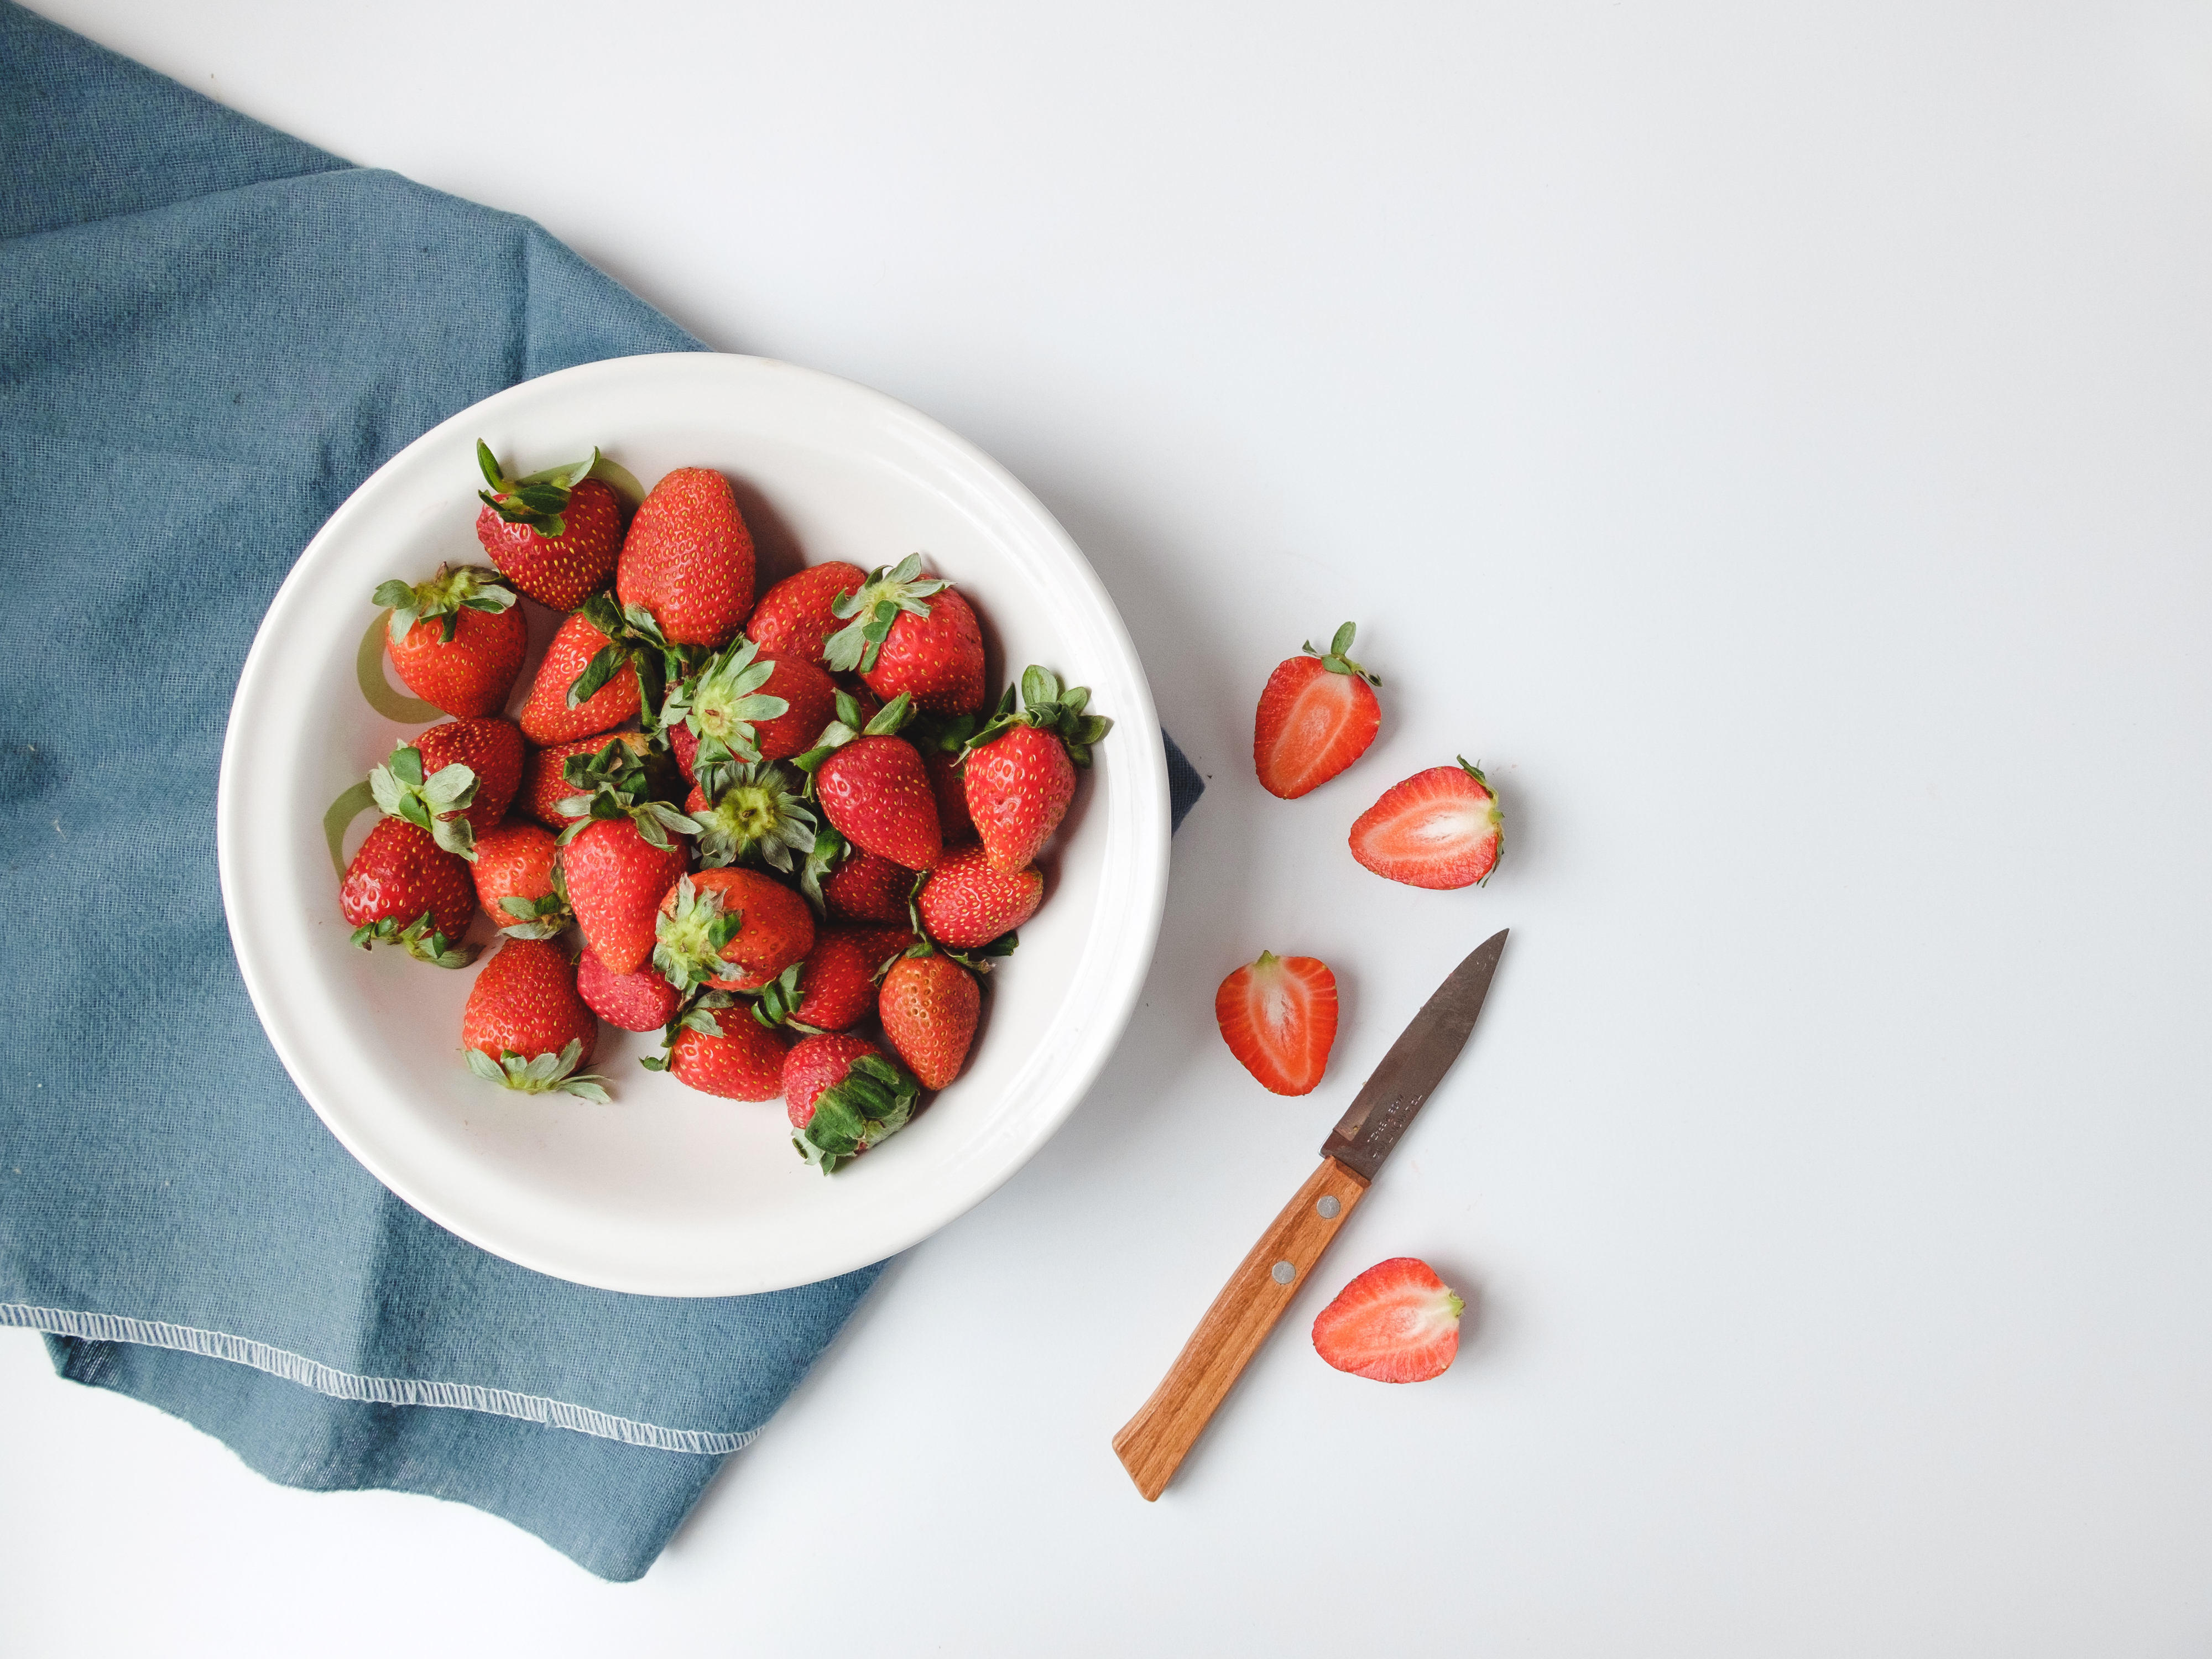 Is It Safe To Eat Moldy Strawberries?